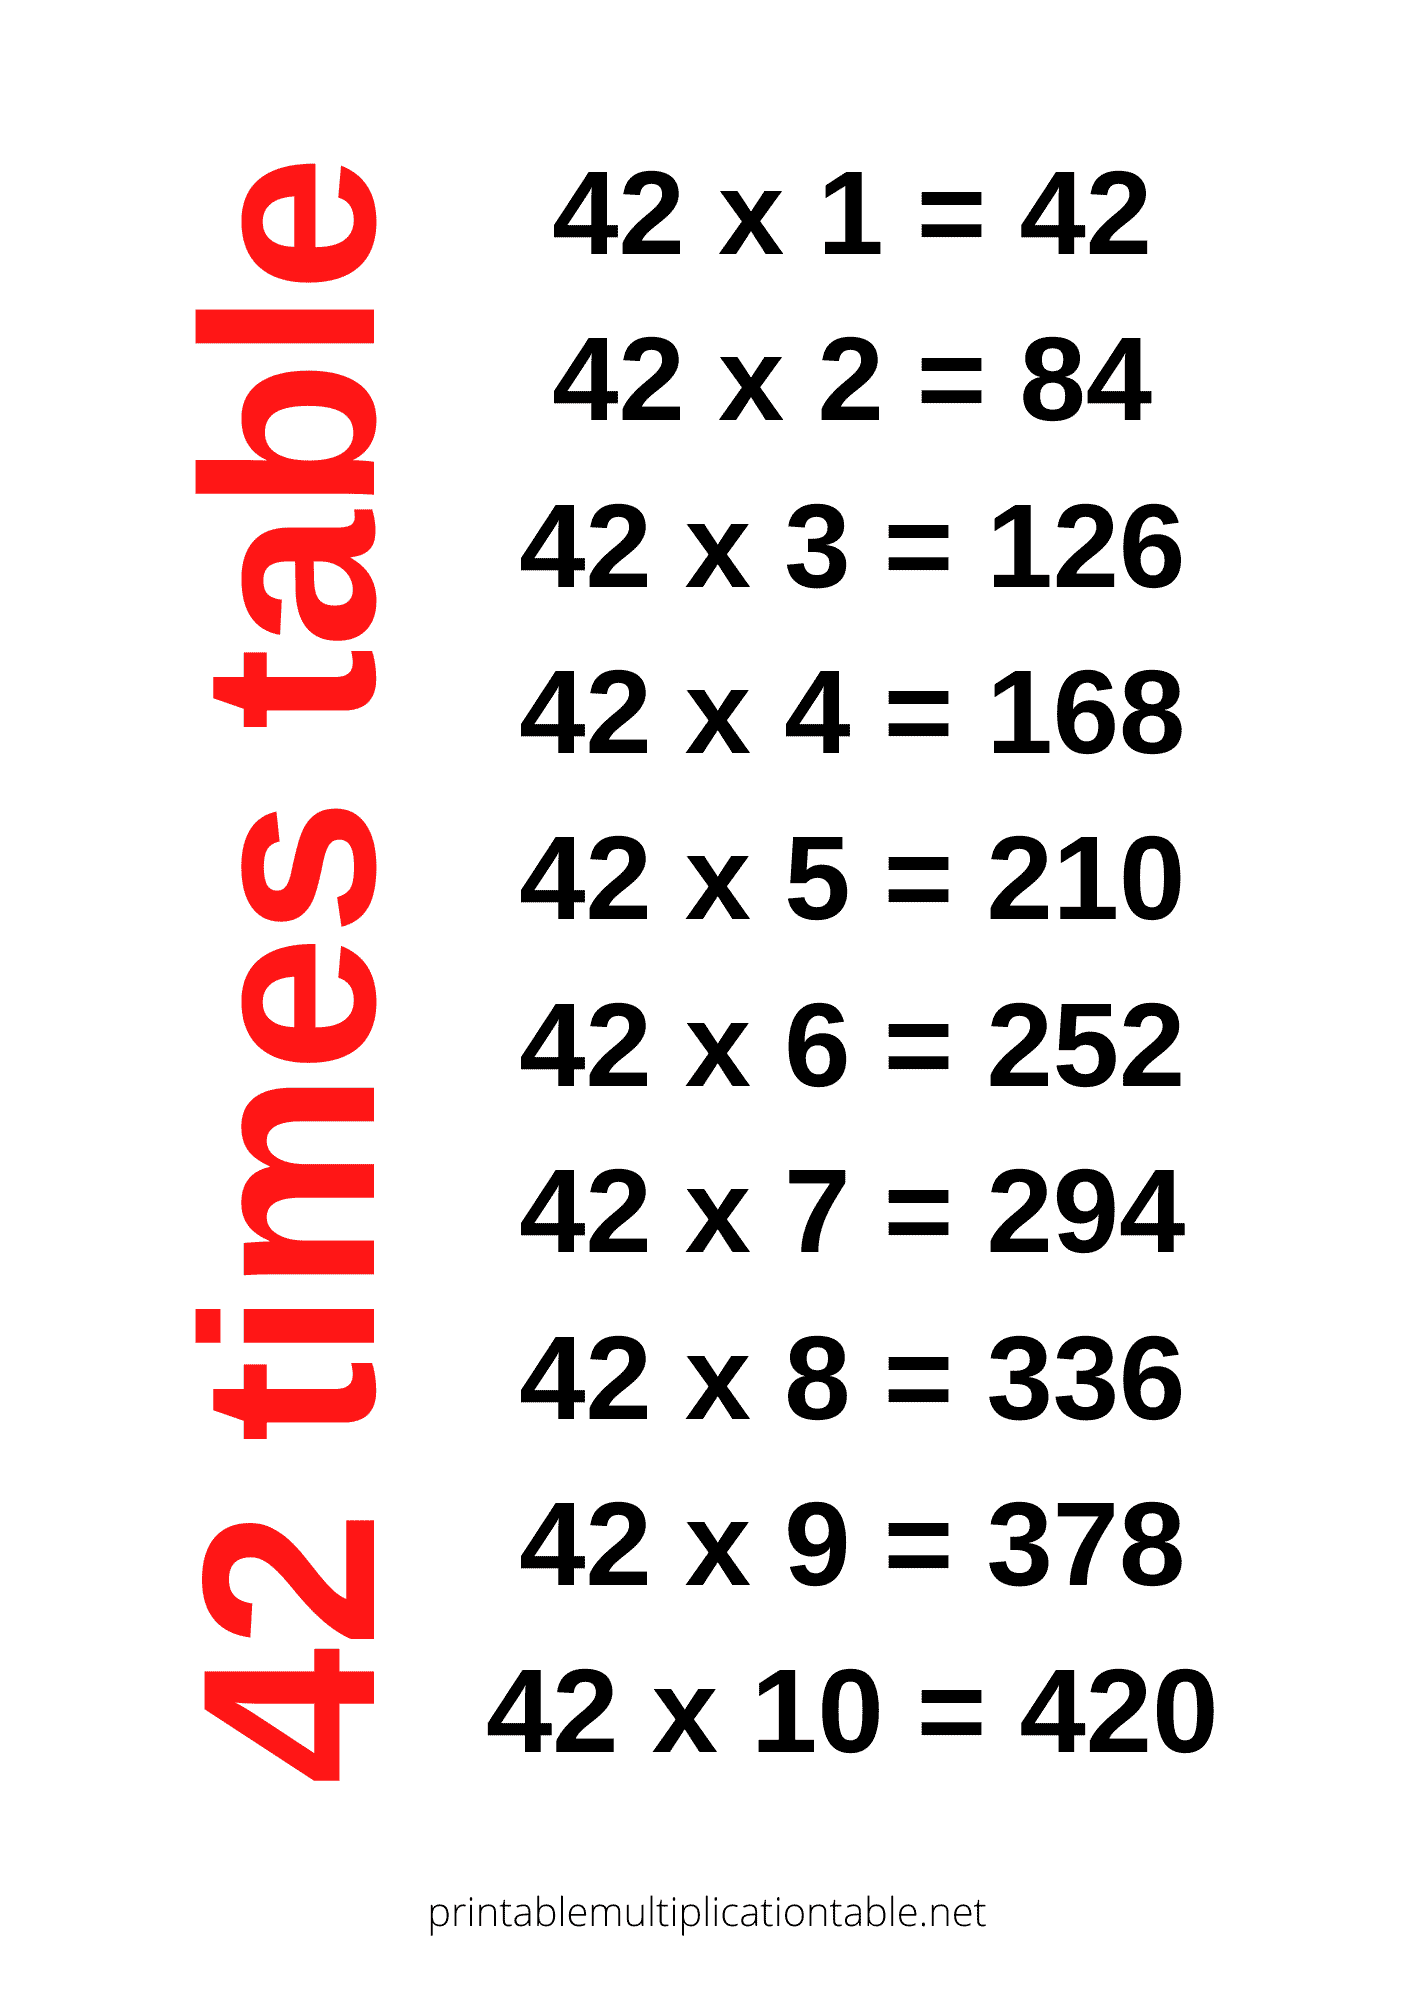 42 times table chart